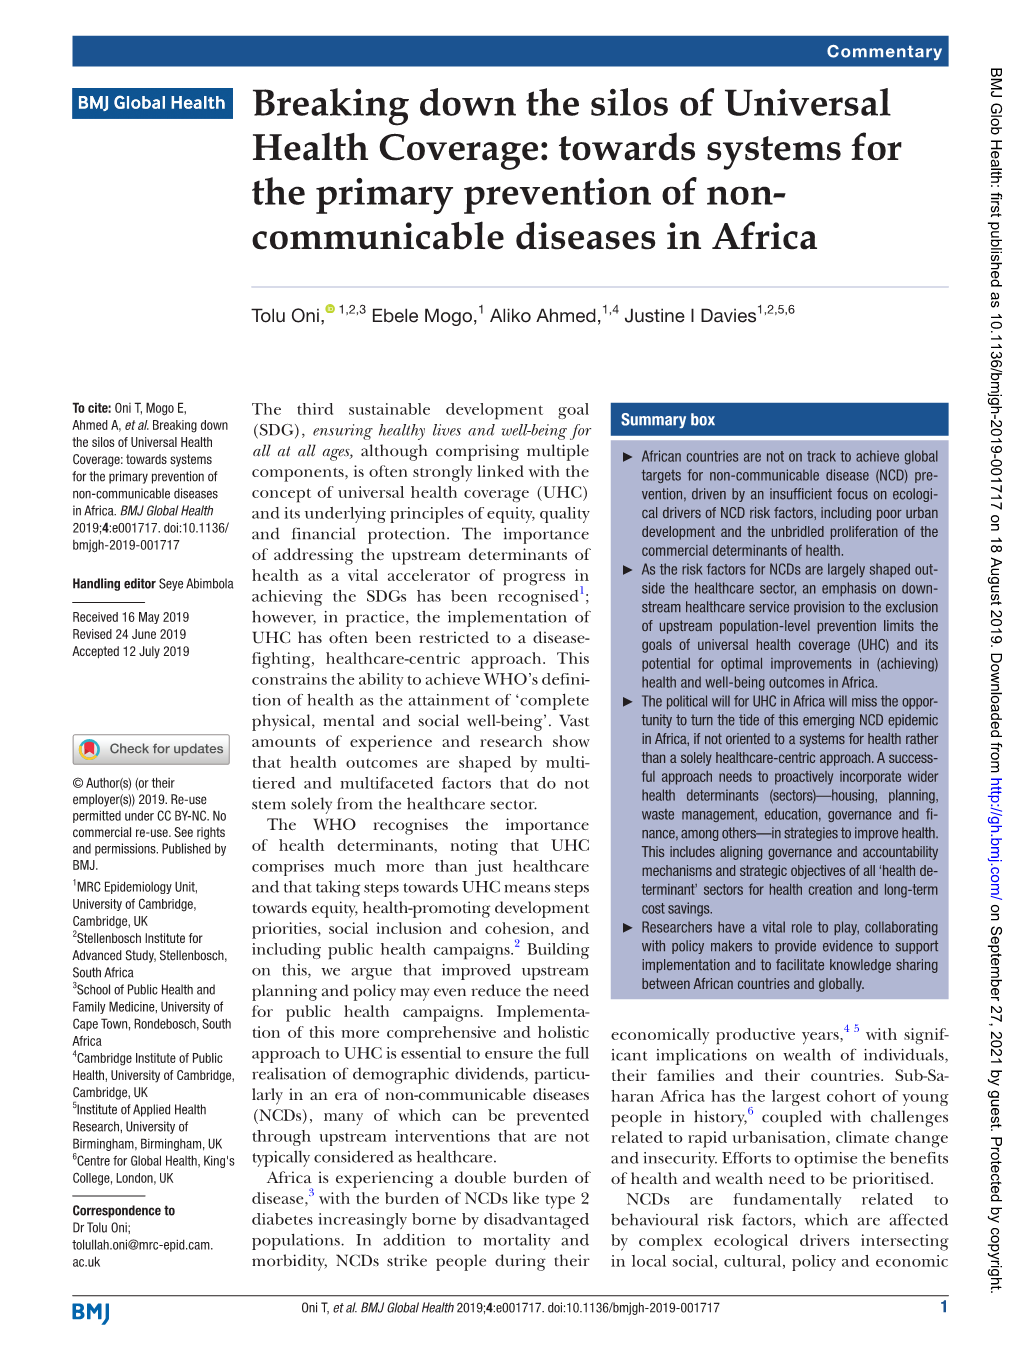 Breaking Down the Silos of Universal Health Coverage: Towards Systems for the Primary Prevention of Non- Communicable Diseases in Africa